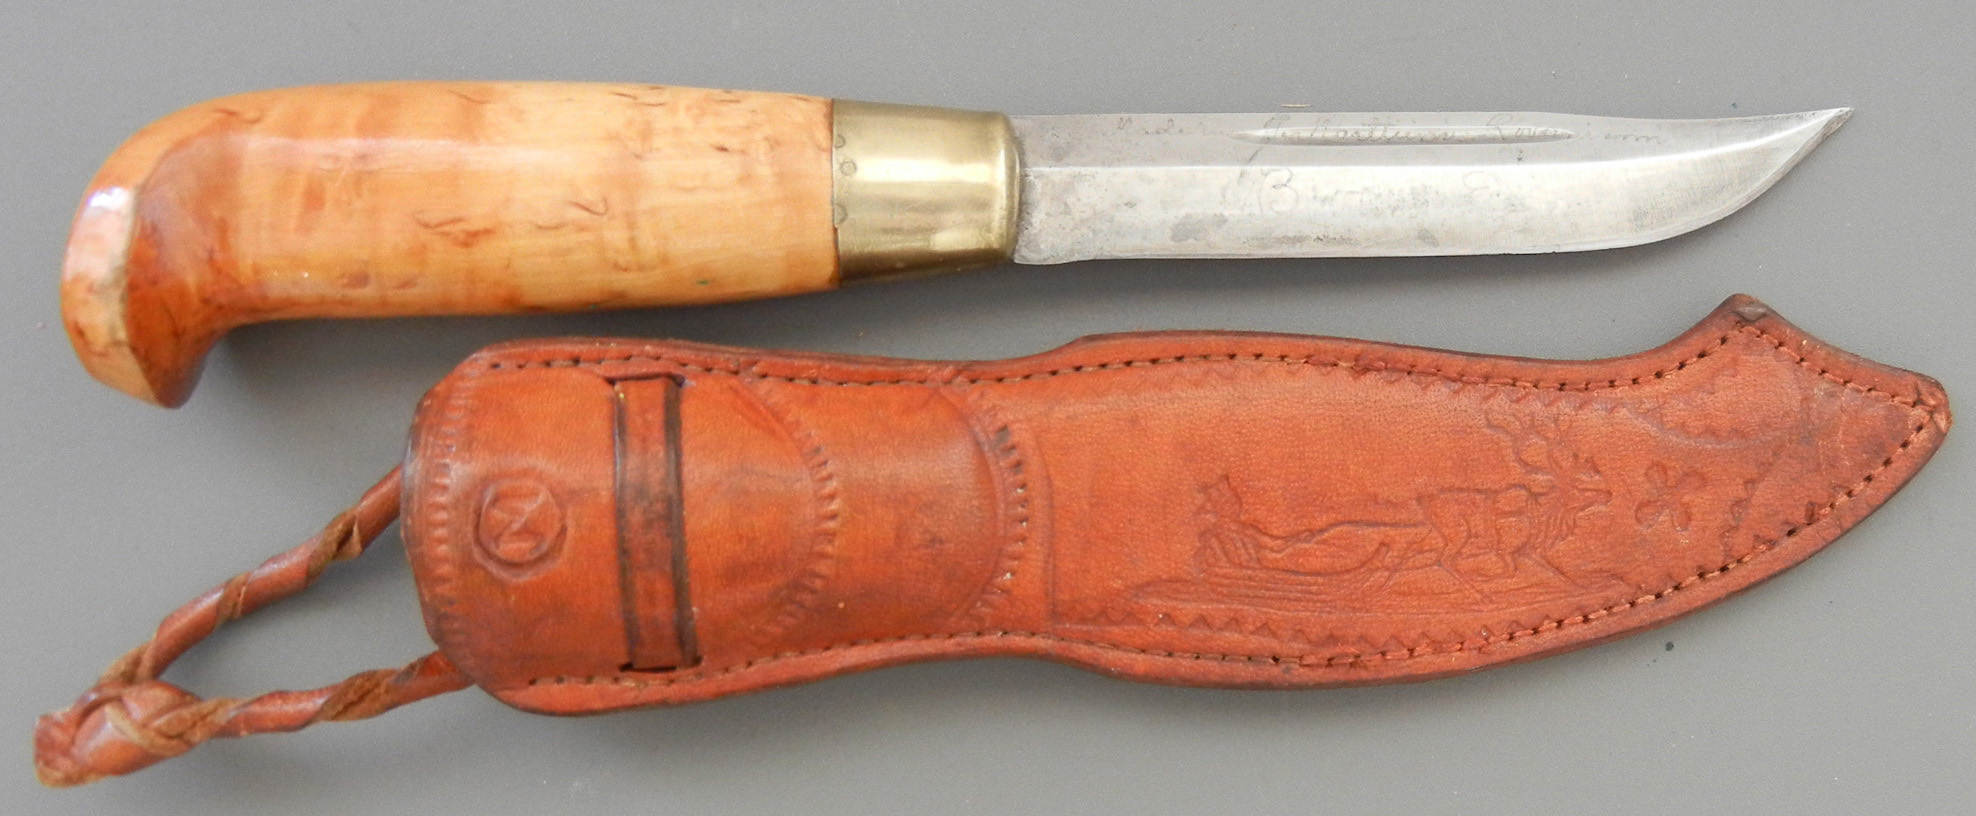 SOLD - Original Ilves Knife - SOLD - Click Image to Close